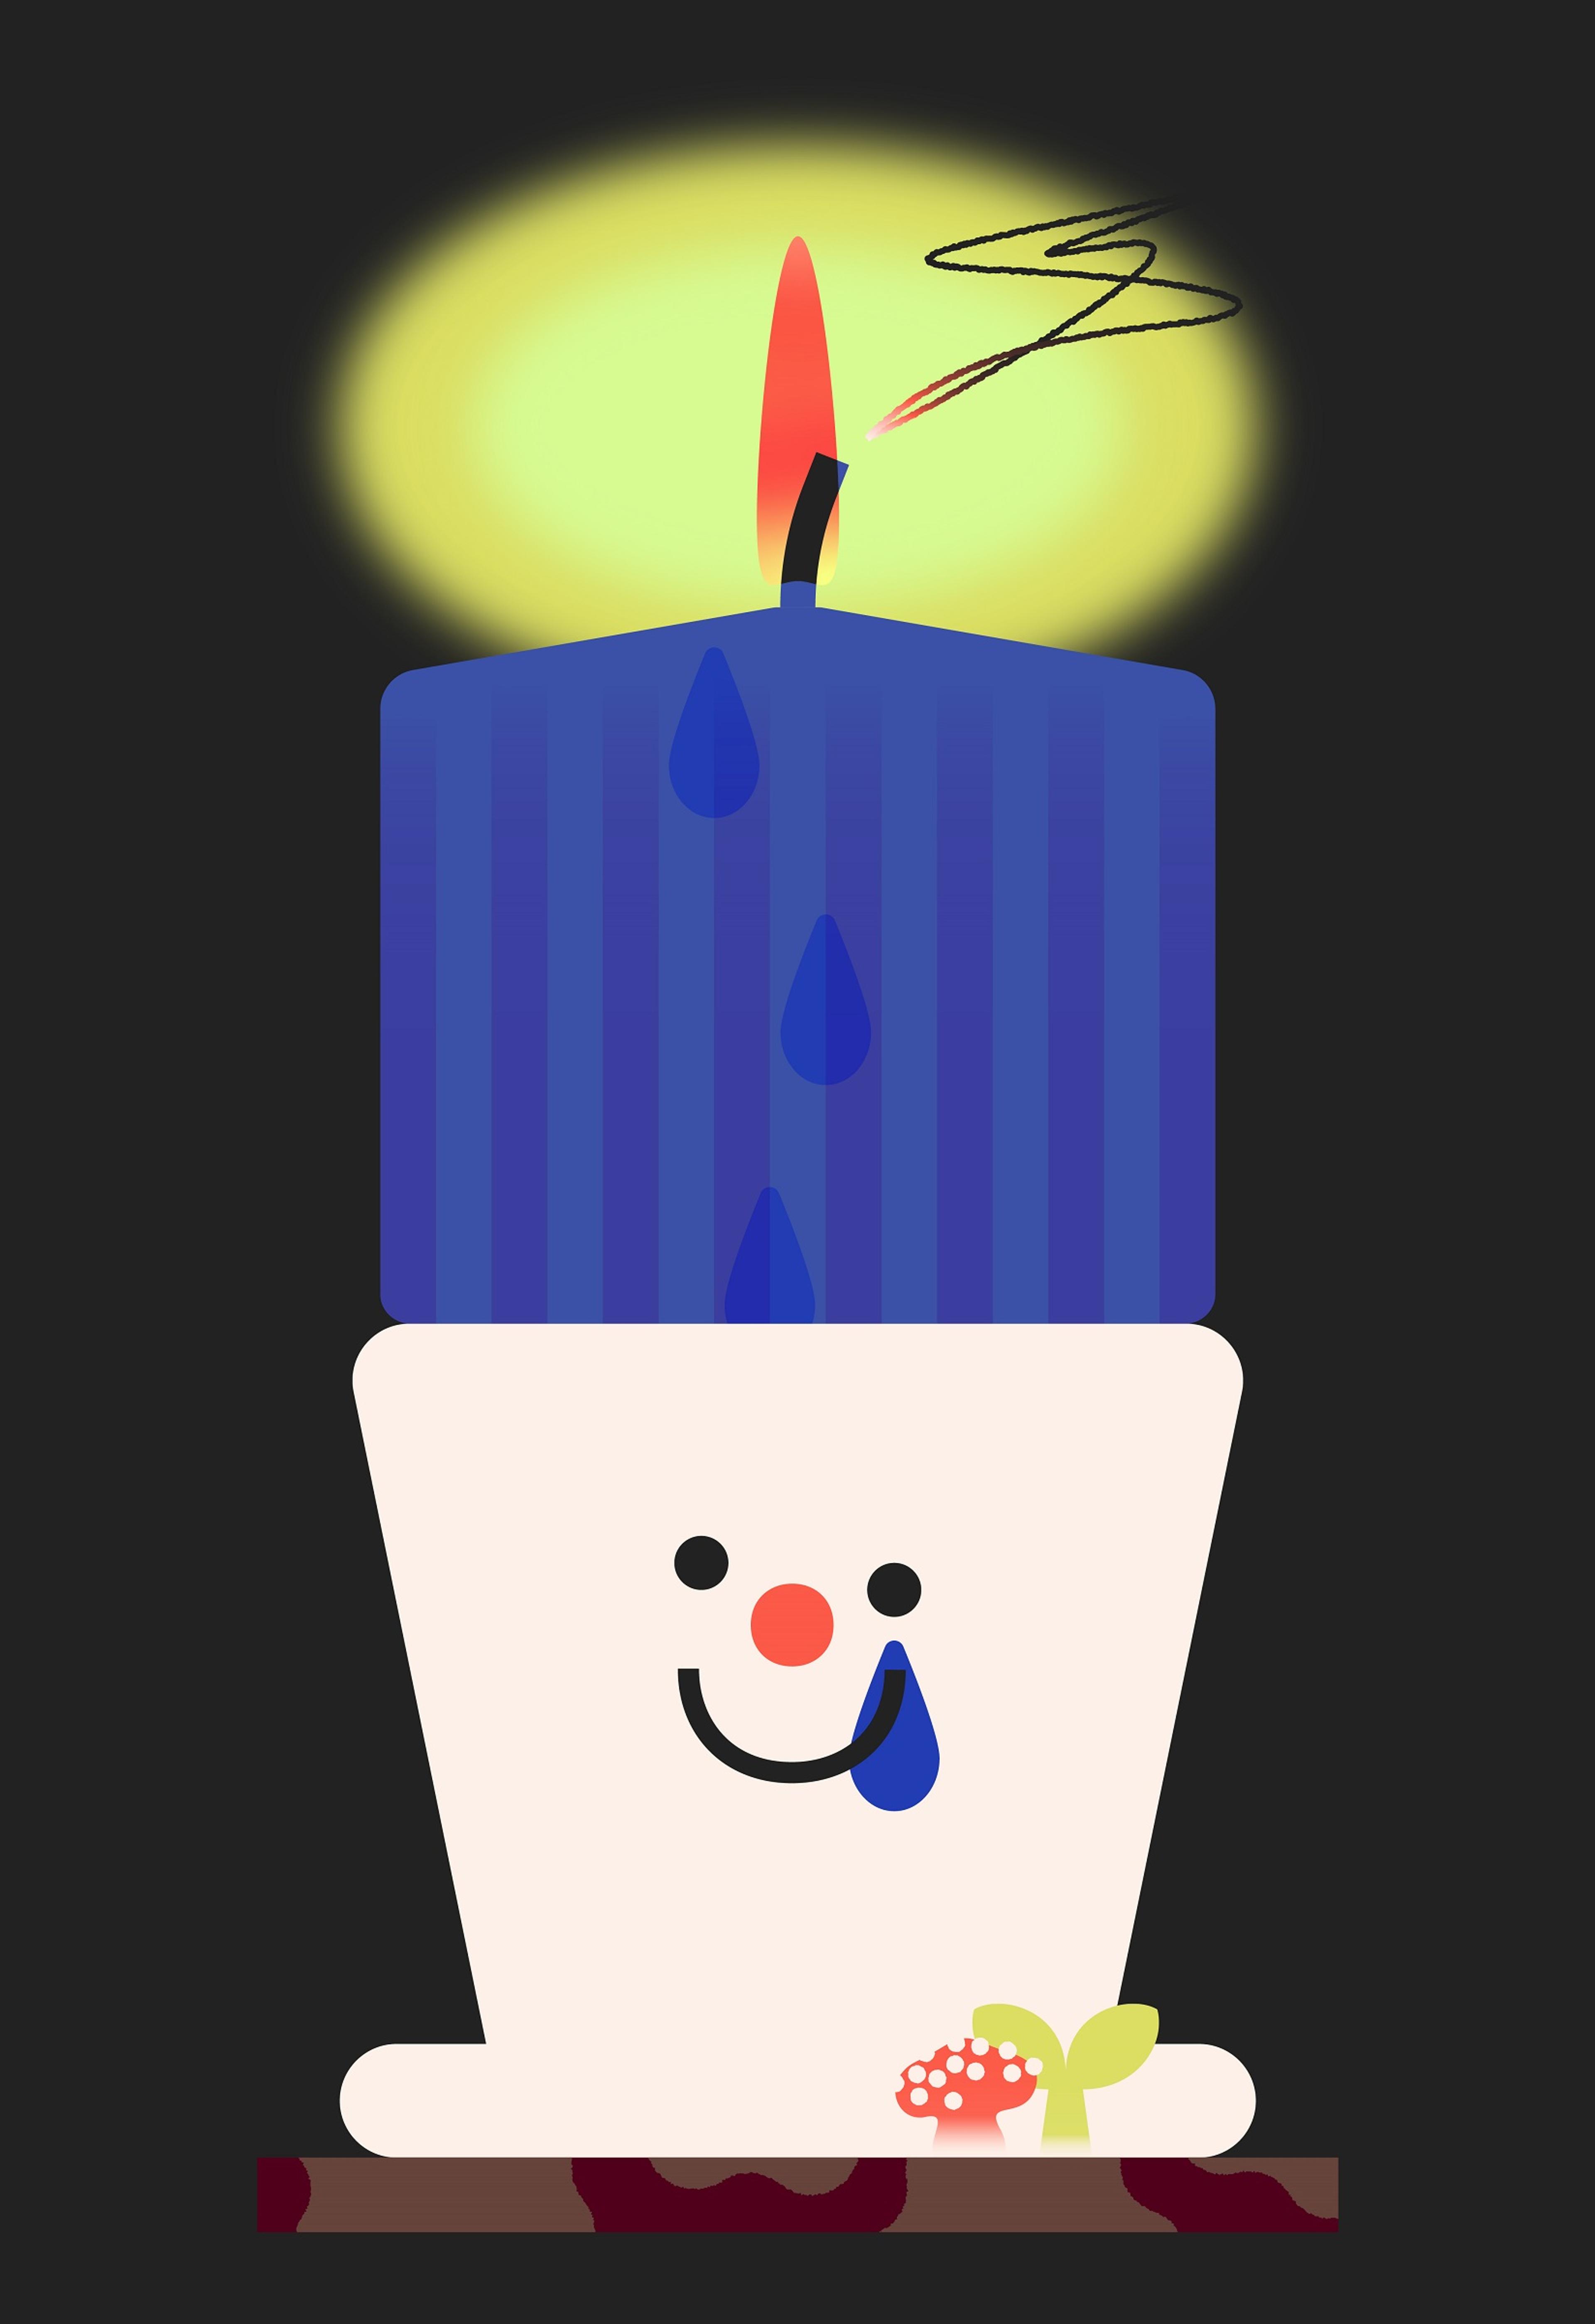 Illustration of a lit candle against a dark background in a holder with a smiley face